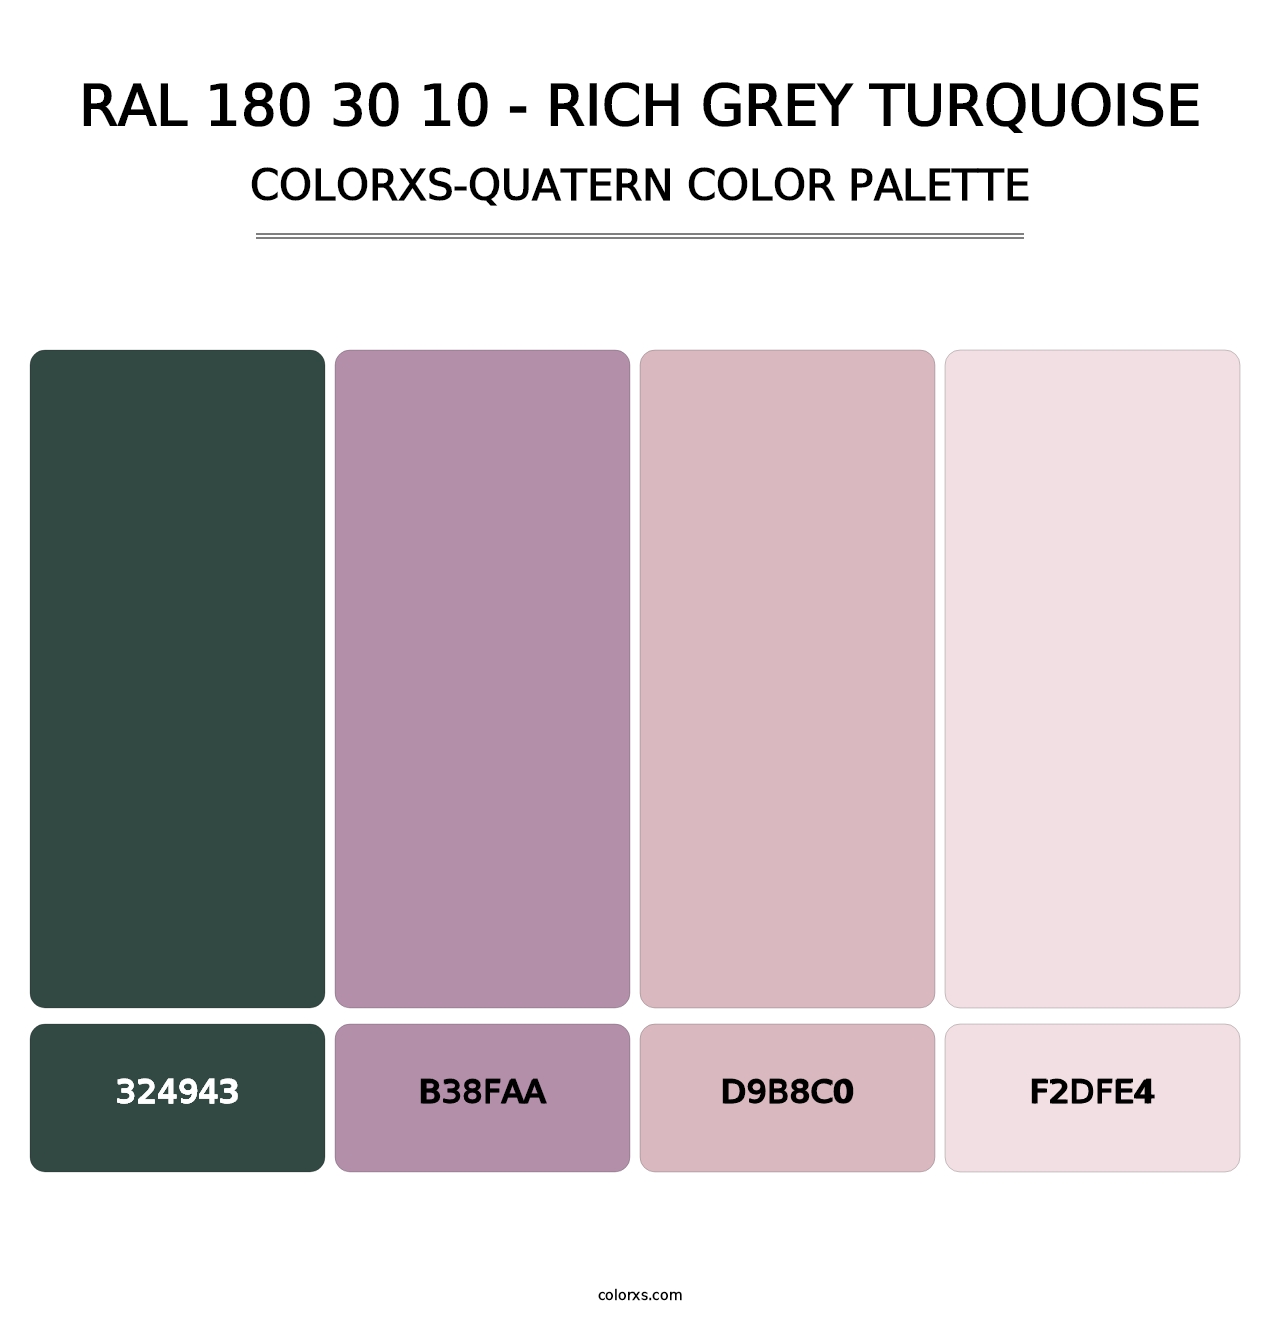 RAL 180 30 10 - Rich Grey Turquoise - Colorxs Quatern Palette